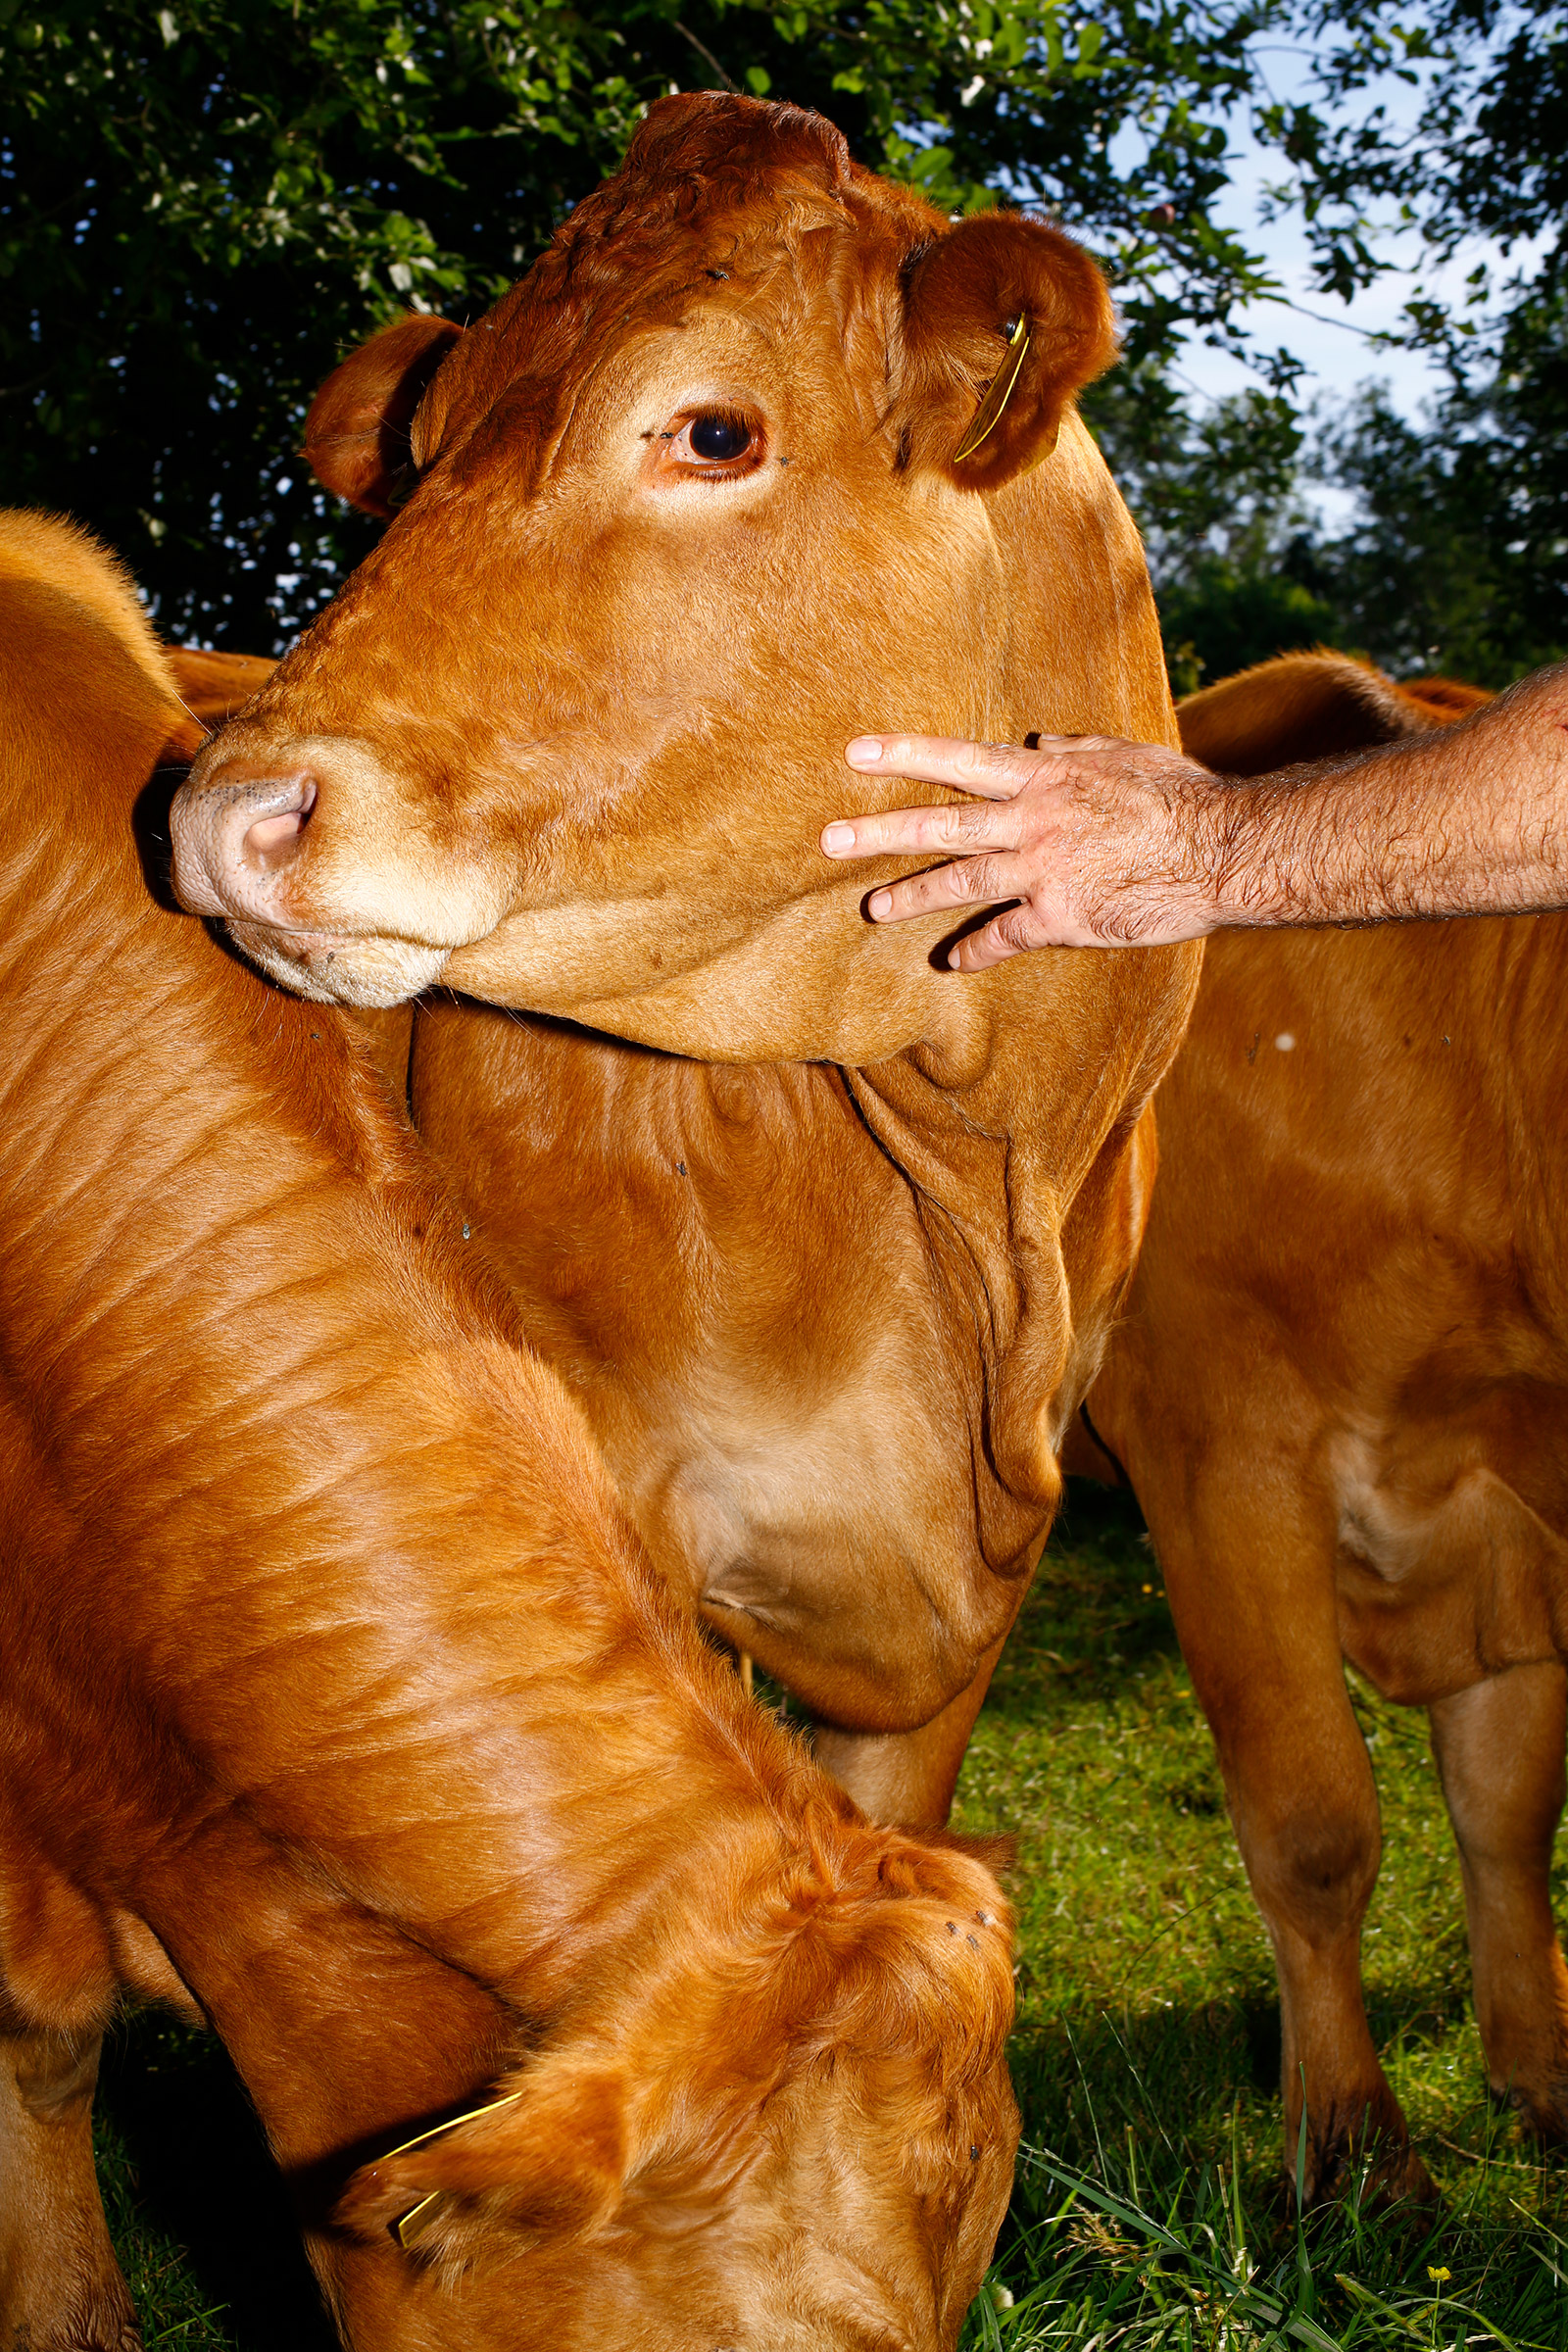 Limousin cows in Farmer John’s pasture. Mosa Meat will cultivate their cells in a lab to grow into hamburger that is genetically identical, no slaughter required (Ricardo Cases for TIME)